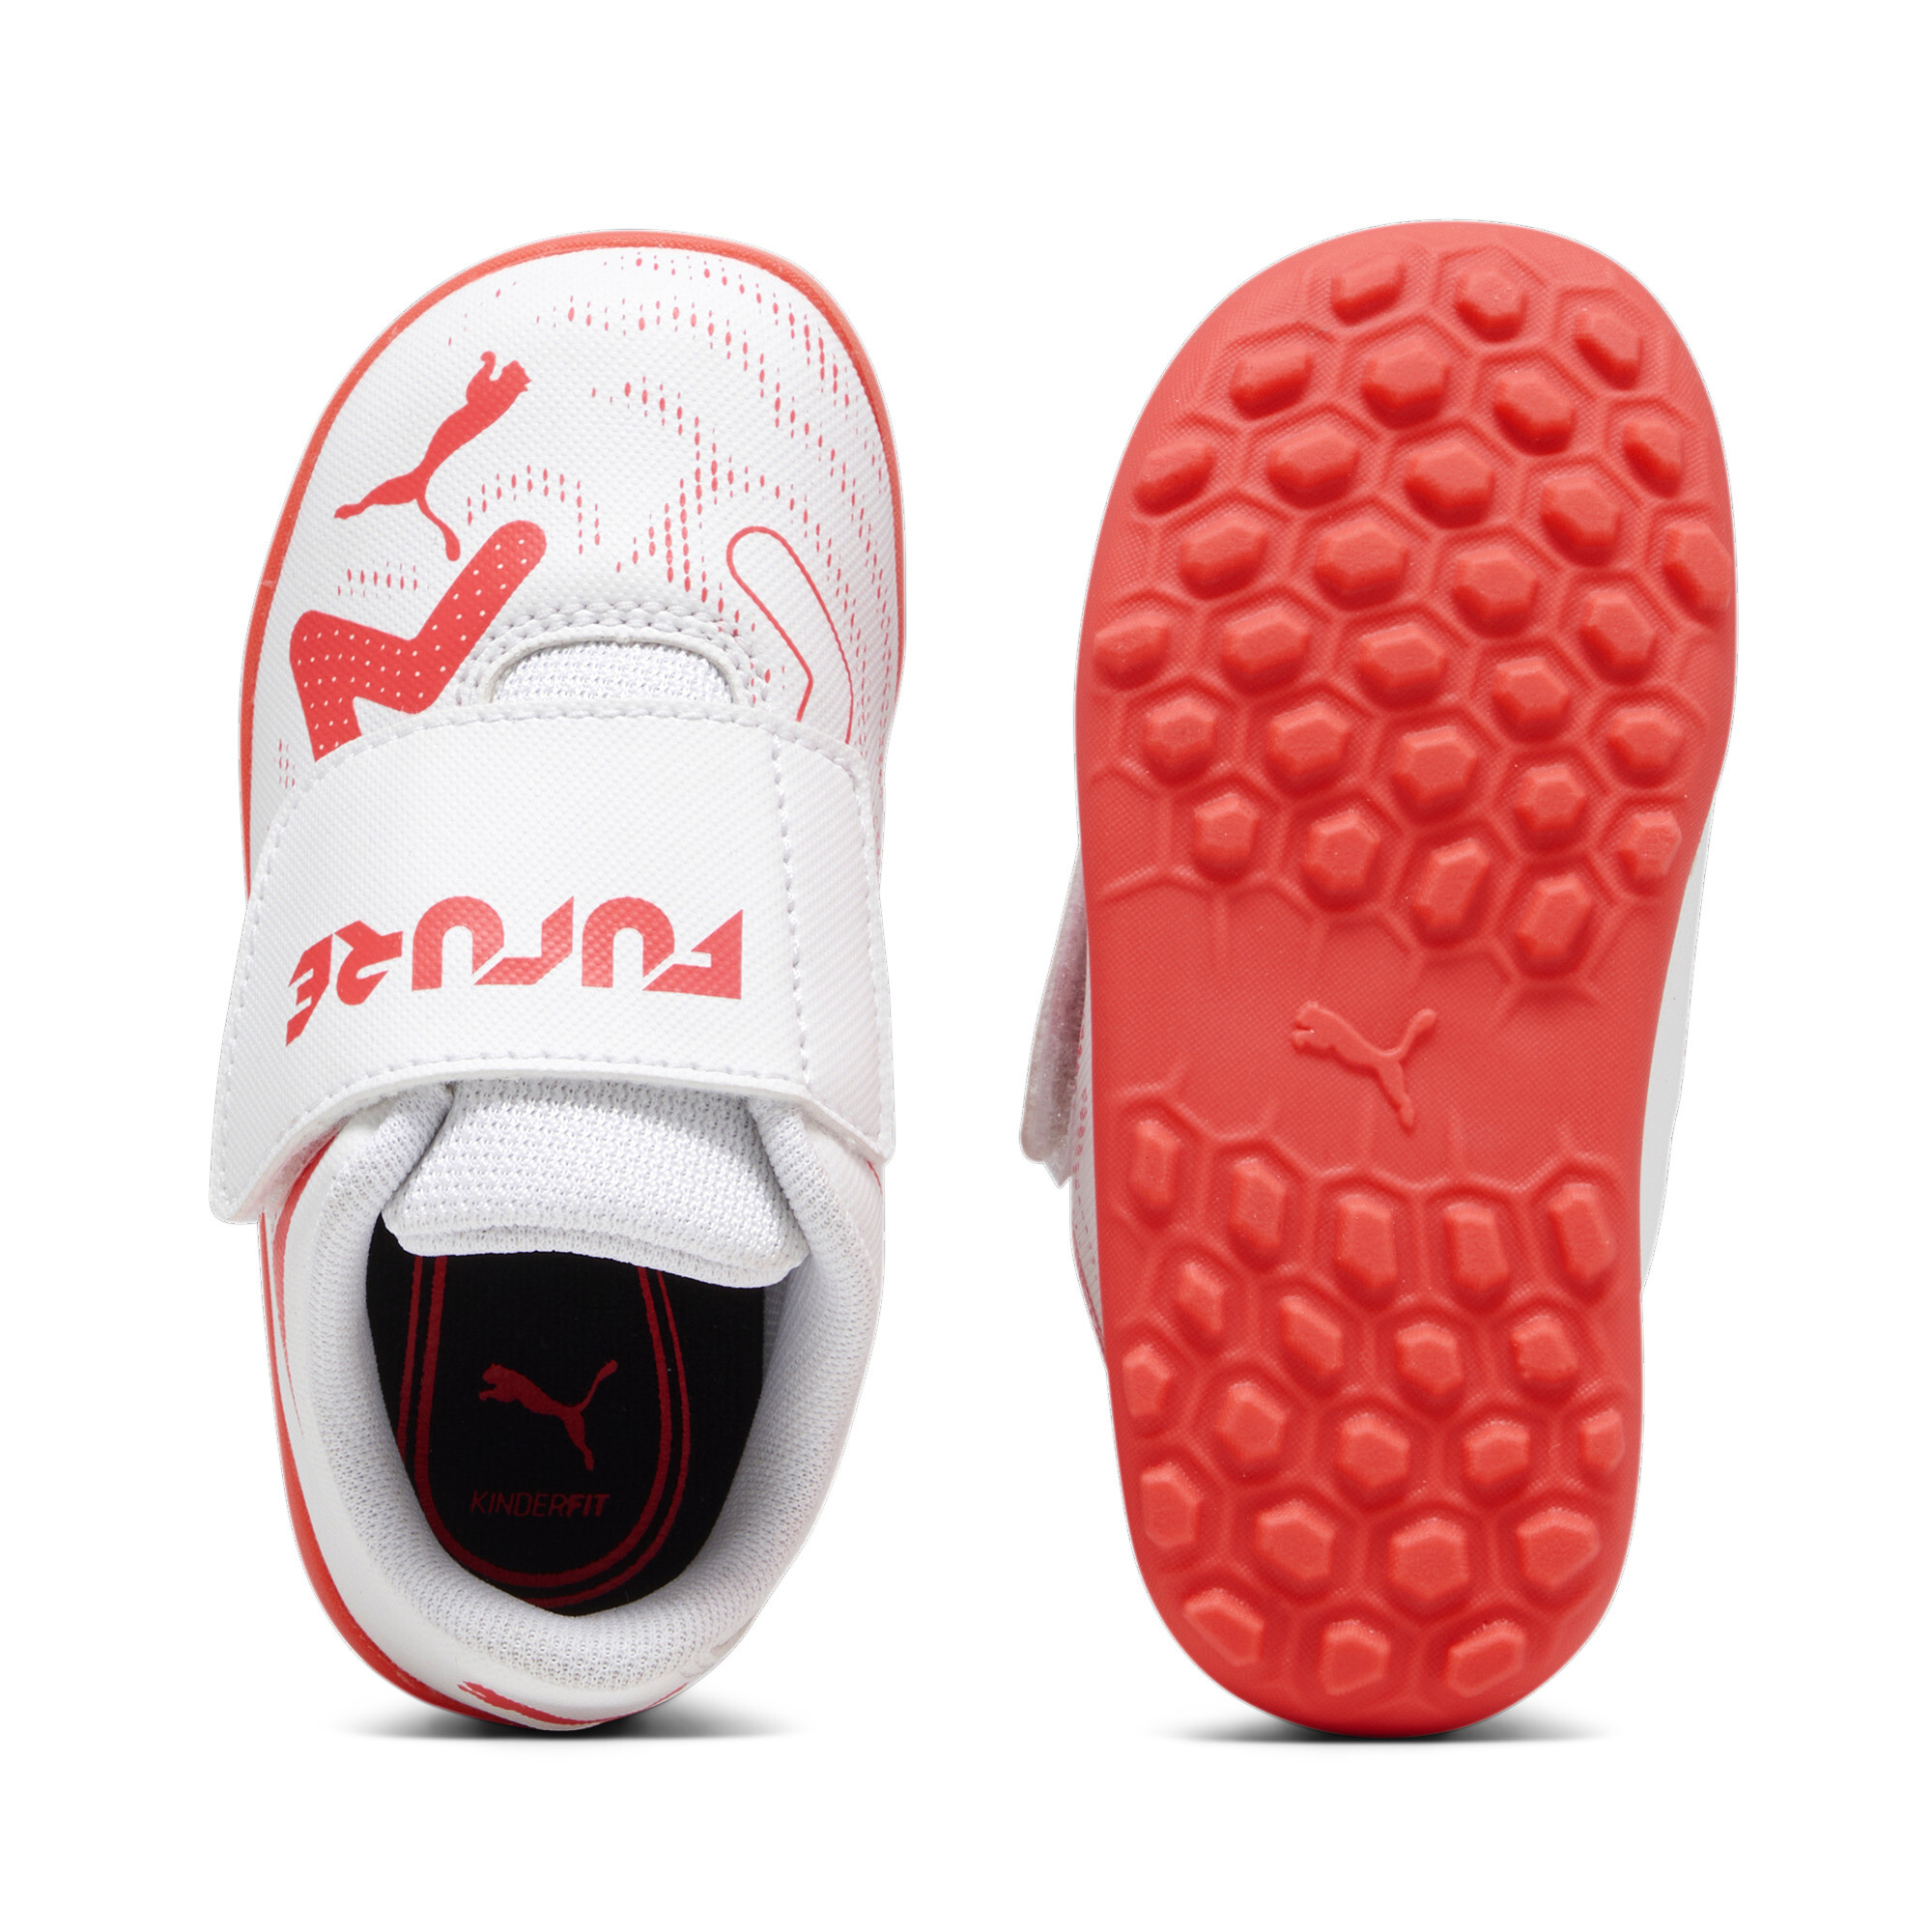 Kids' PUMA FUTURE PLAY TT Toddlers' Football Boots In White, Size EU 25